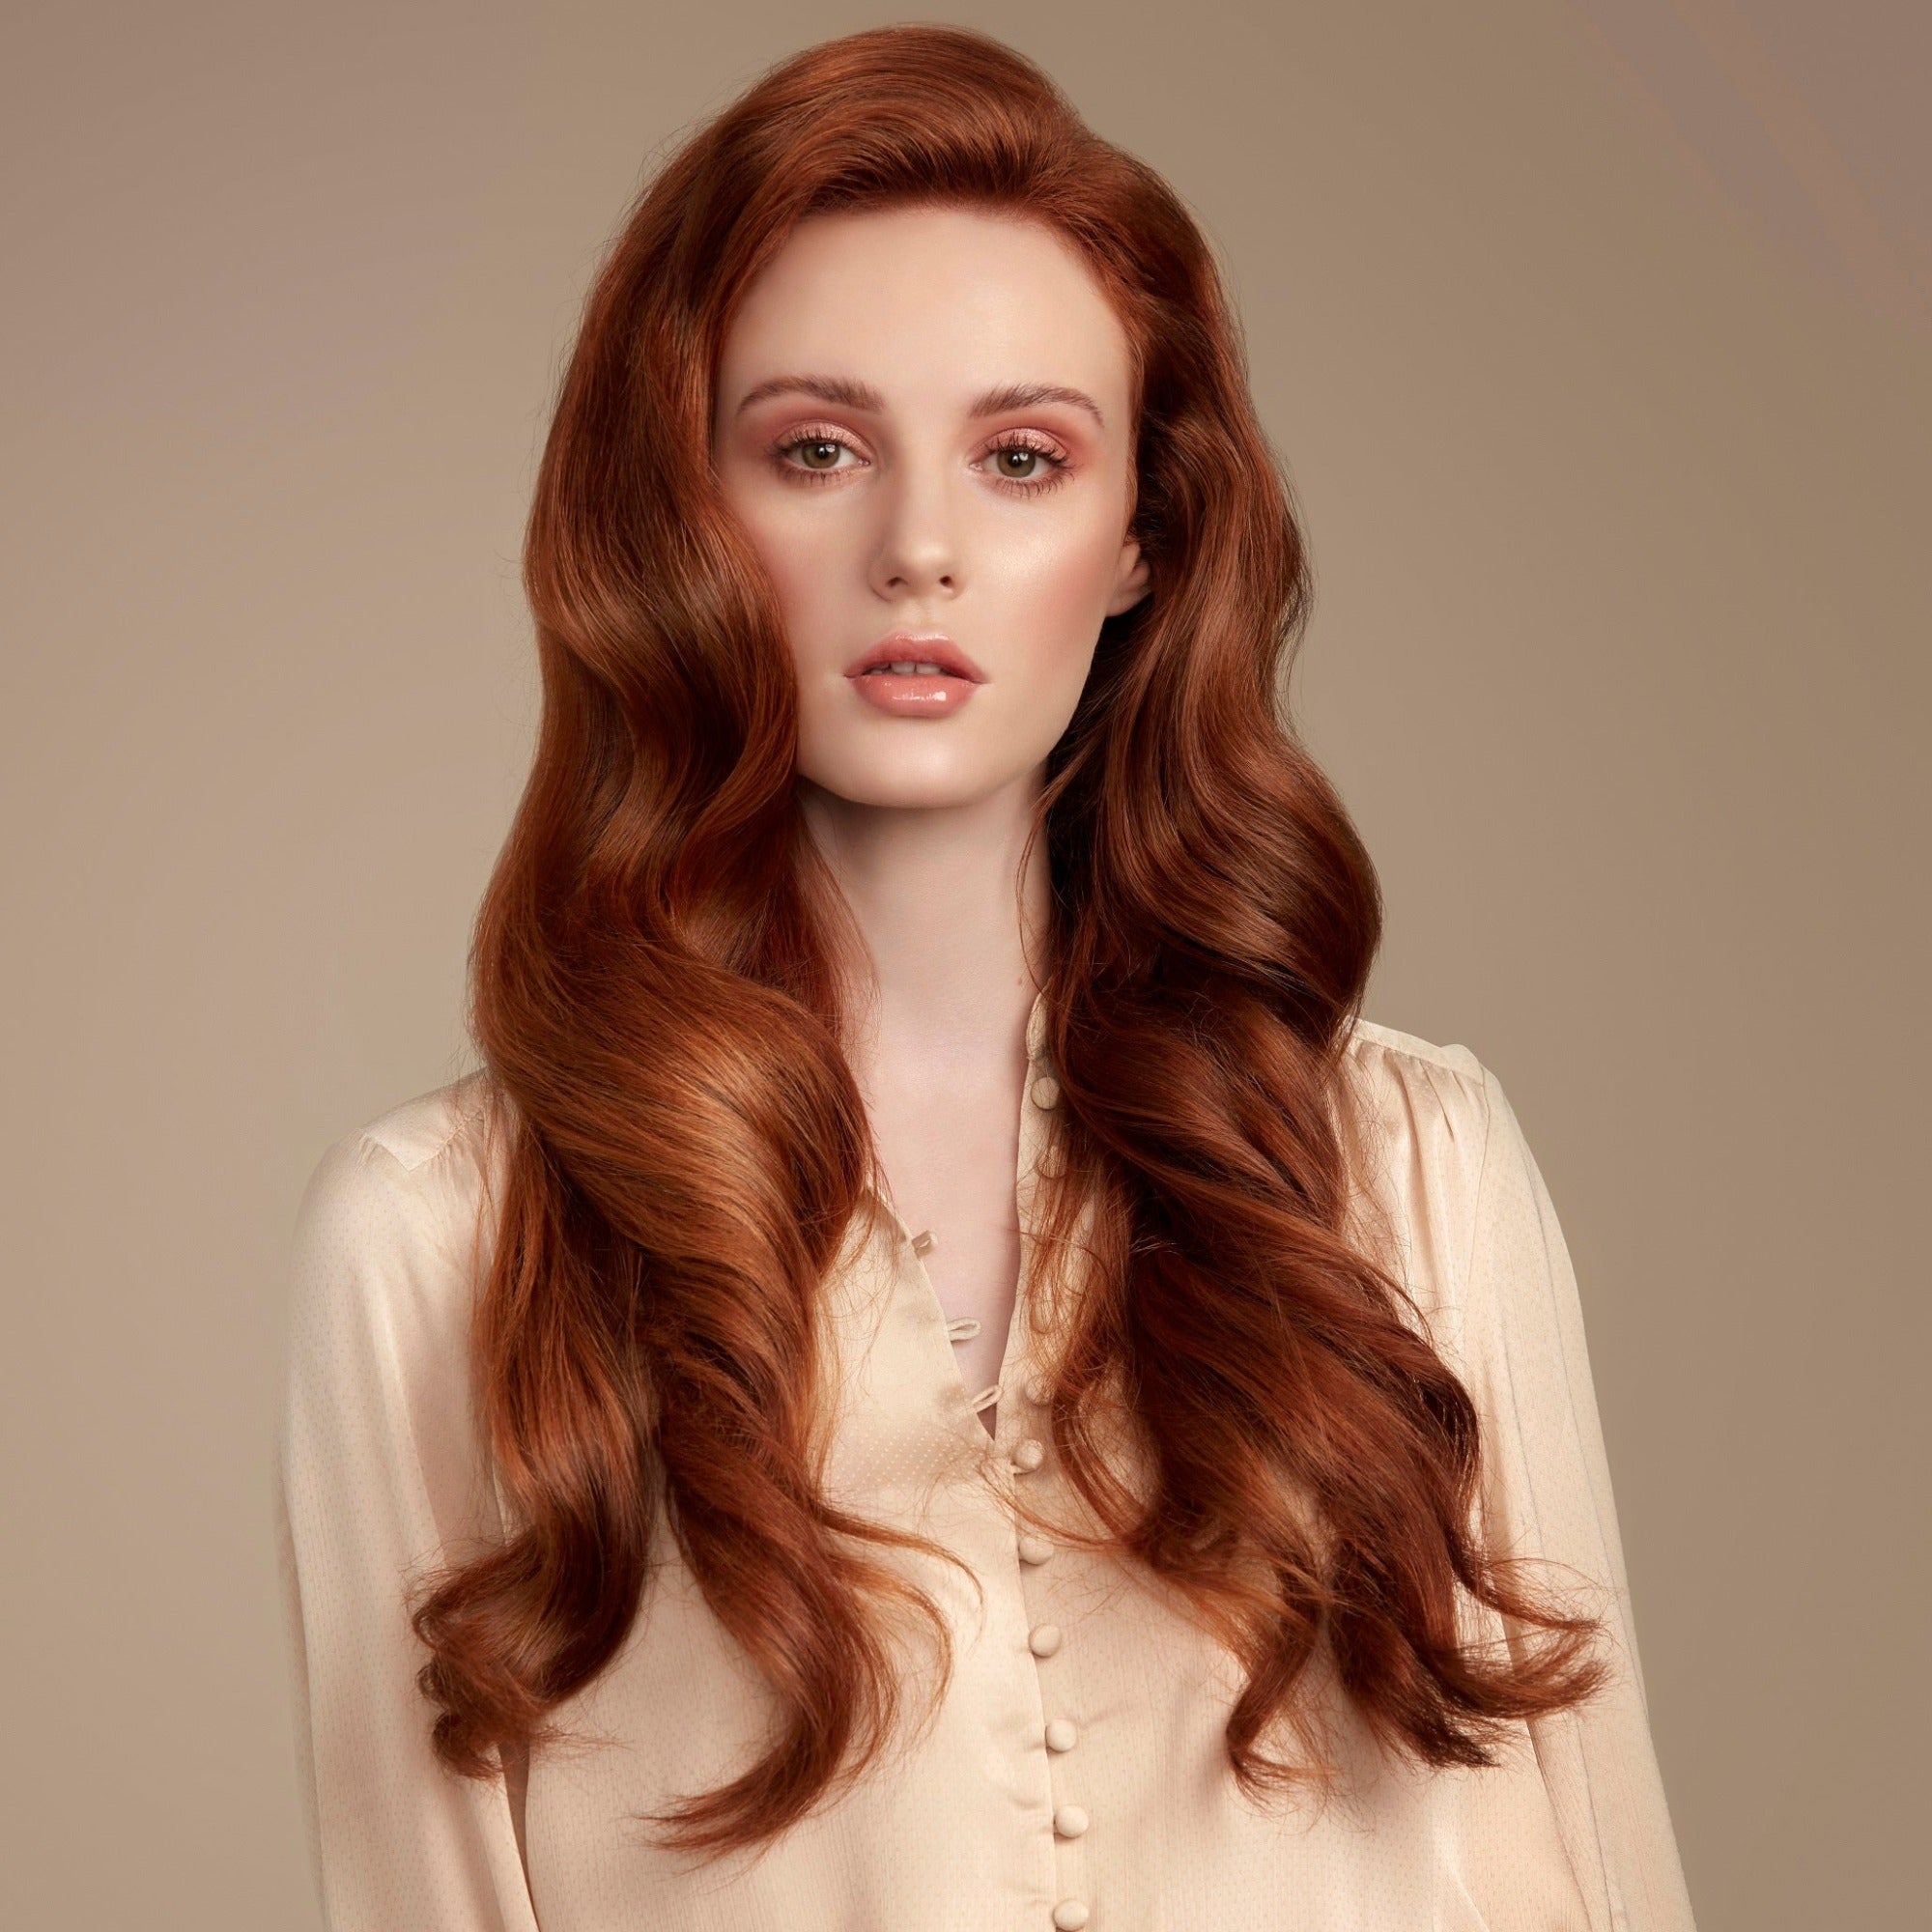 Female model with flowing long red wavy hair. She has a pale champagne coloured top. She is looking directly at the camera.. She has super shiny long wavy hair with lots of volume from Moo and Yoo Volumising Spray Mist.